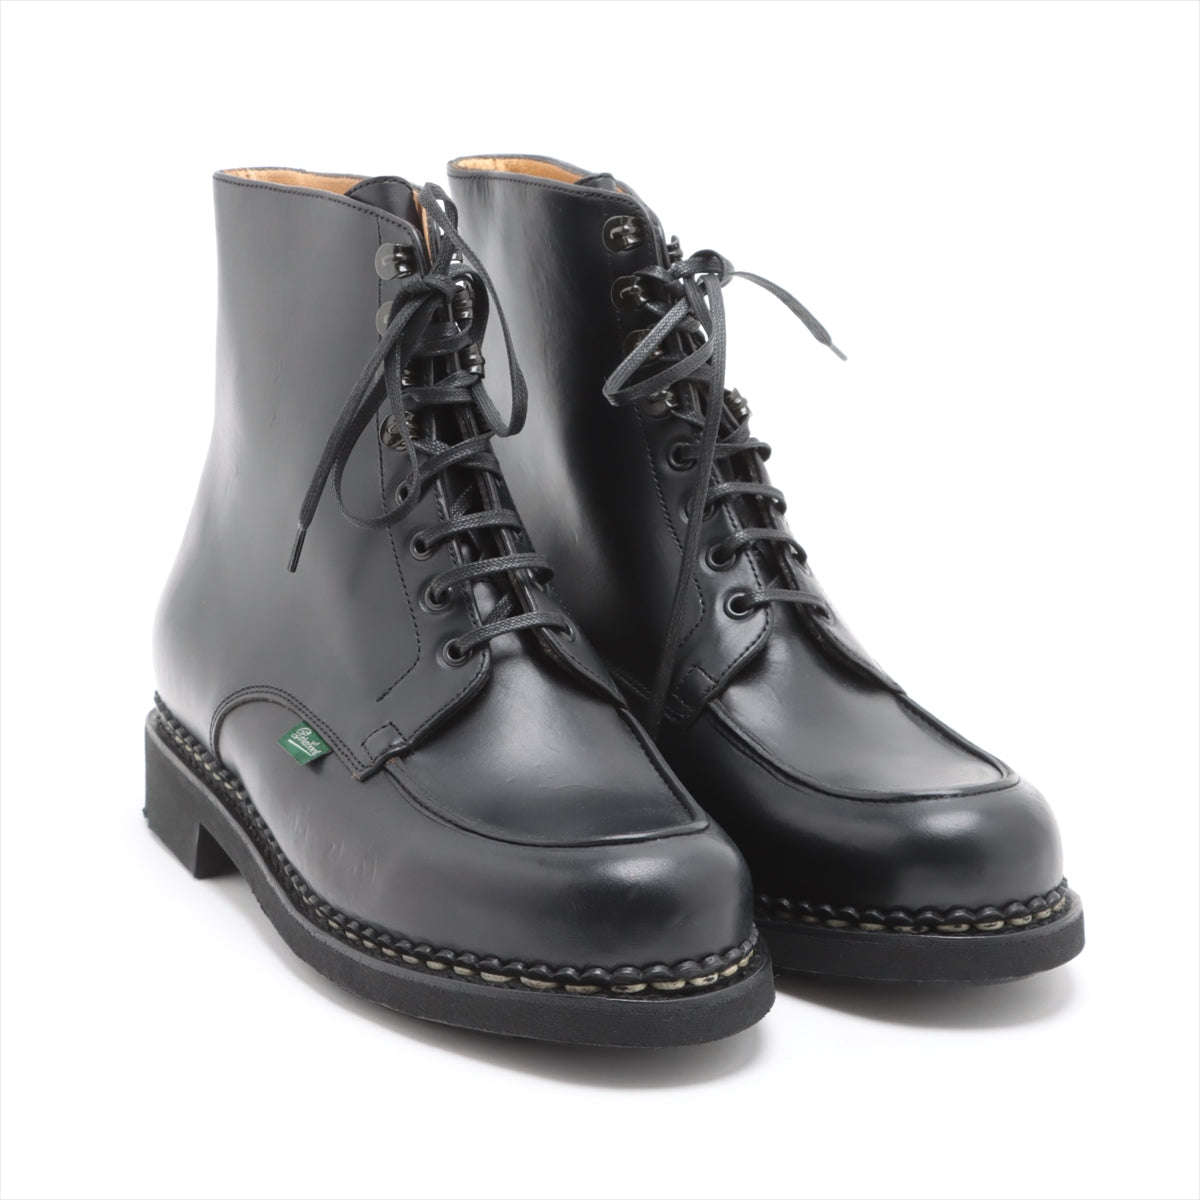 Paraboot Leather Boots 8 1/2 Men's Black BEAULIEU Lace up box There is a bag